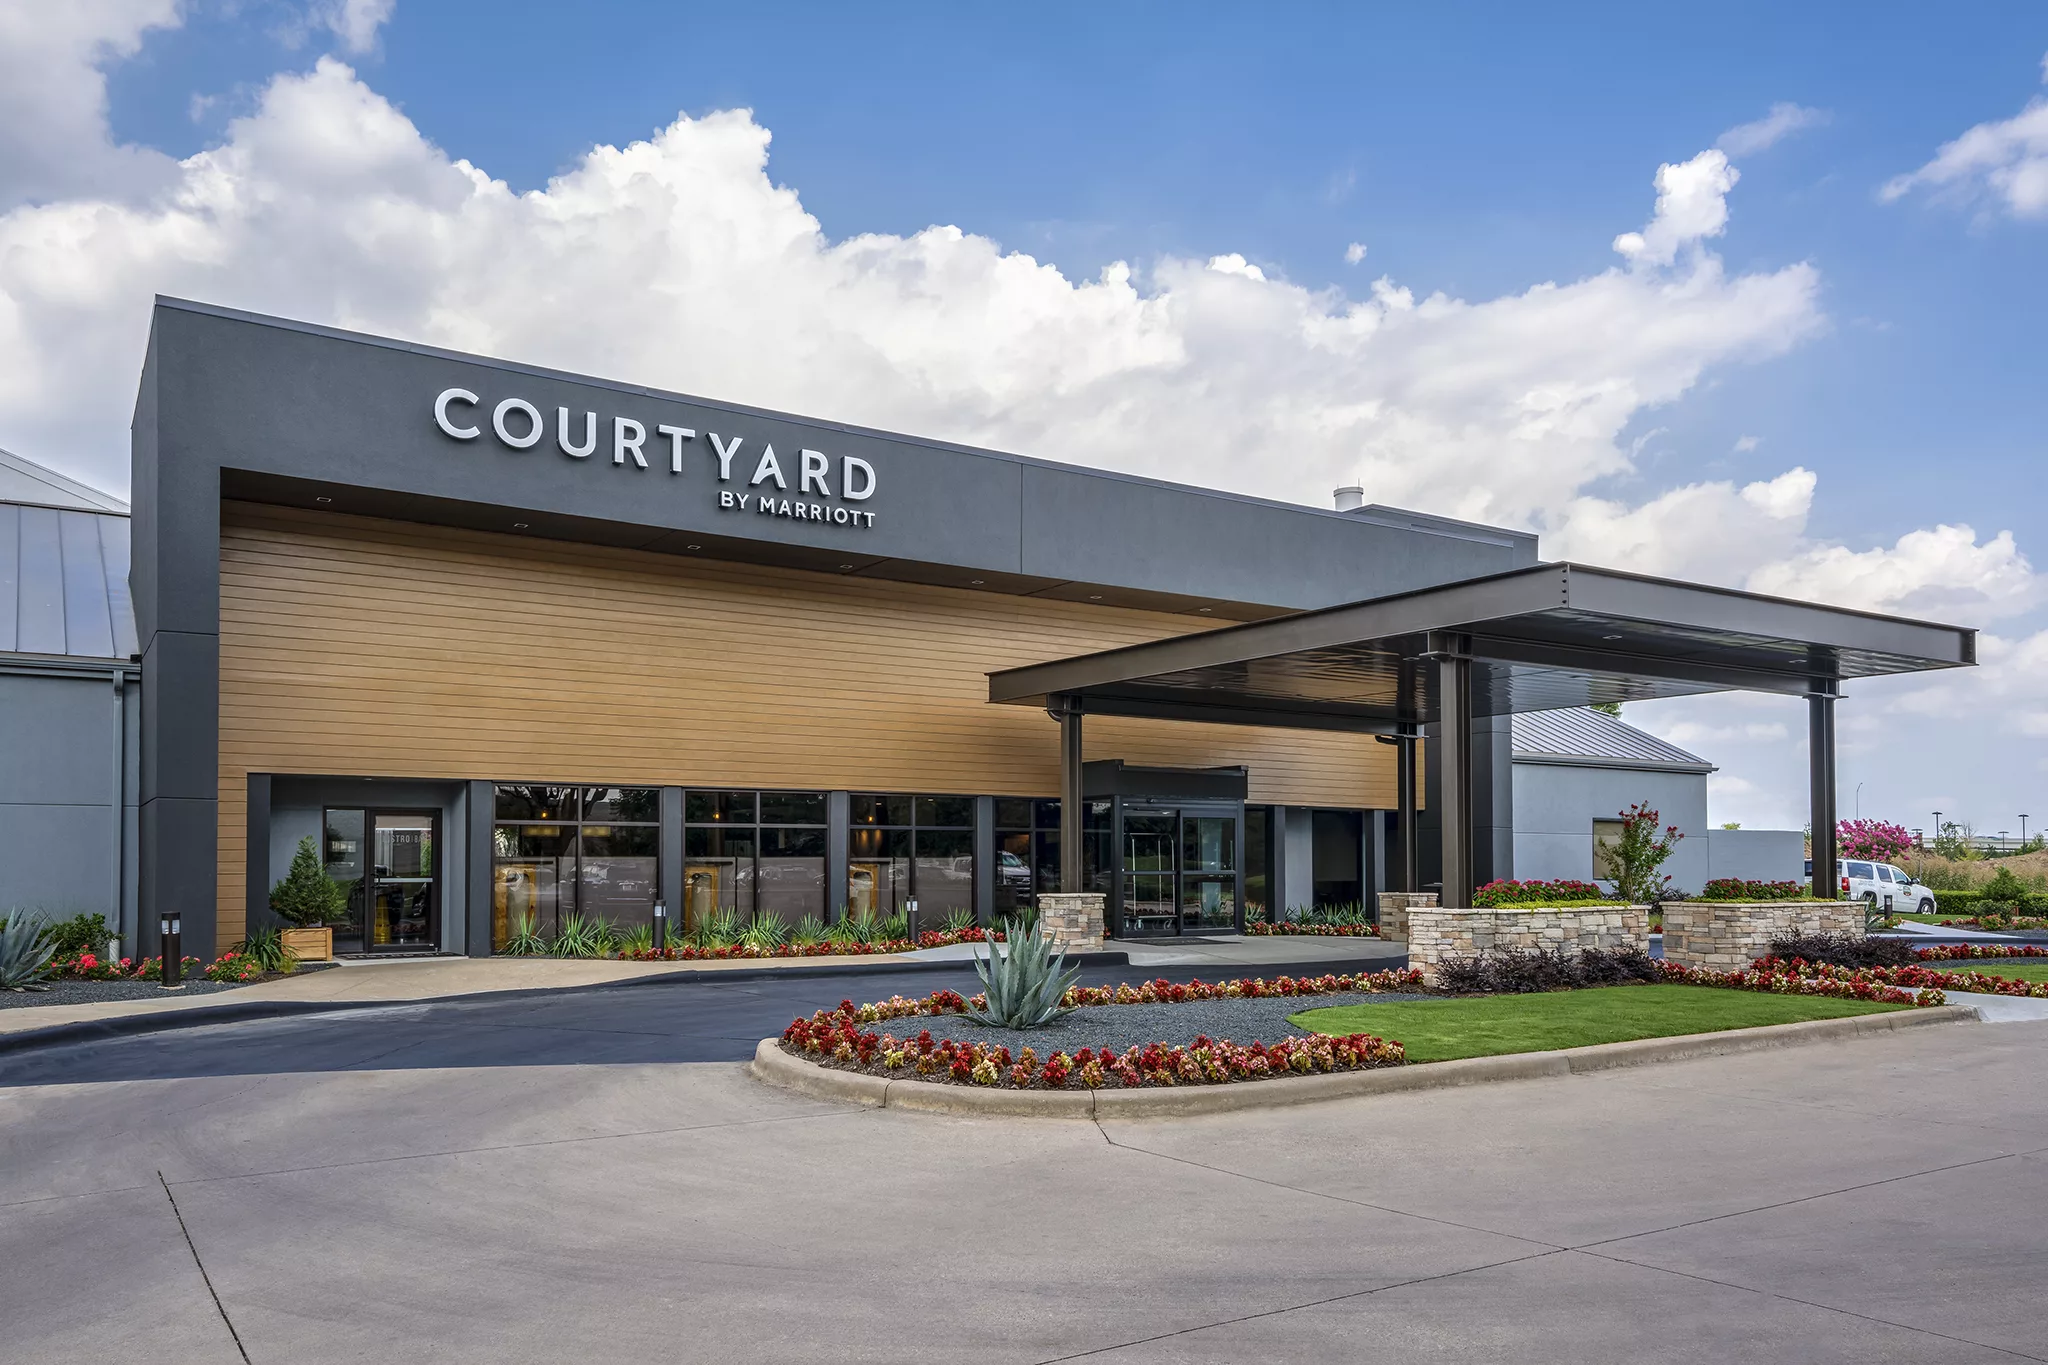 design build completion of the exterior renovation of hotel in Grapevine Texas